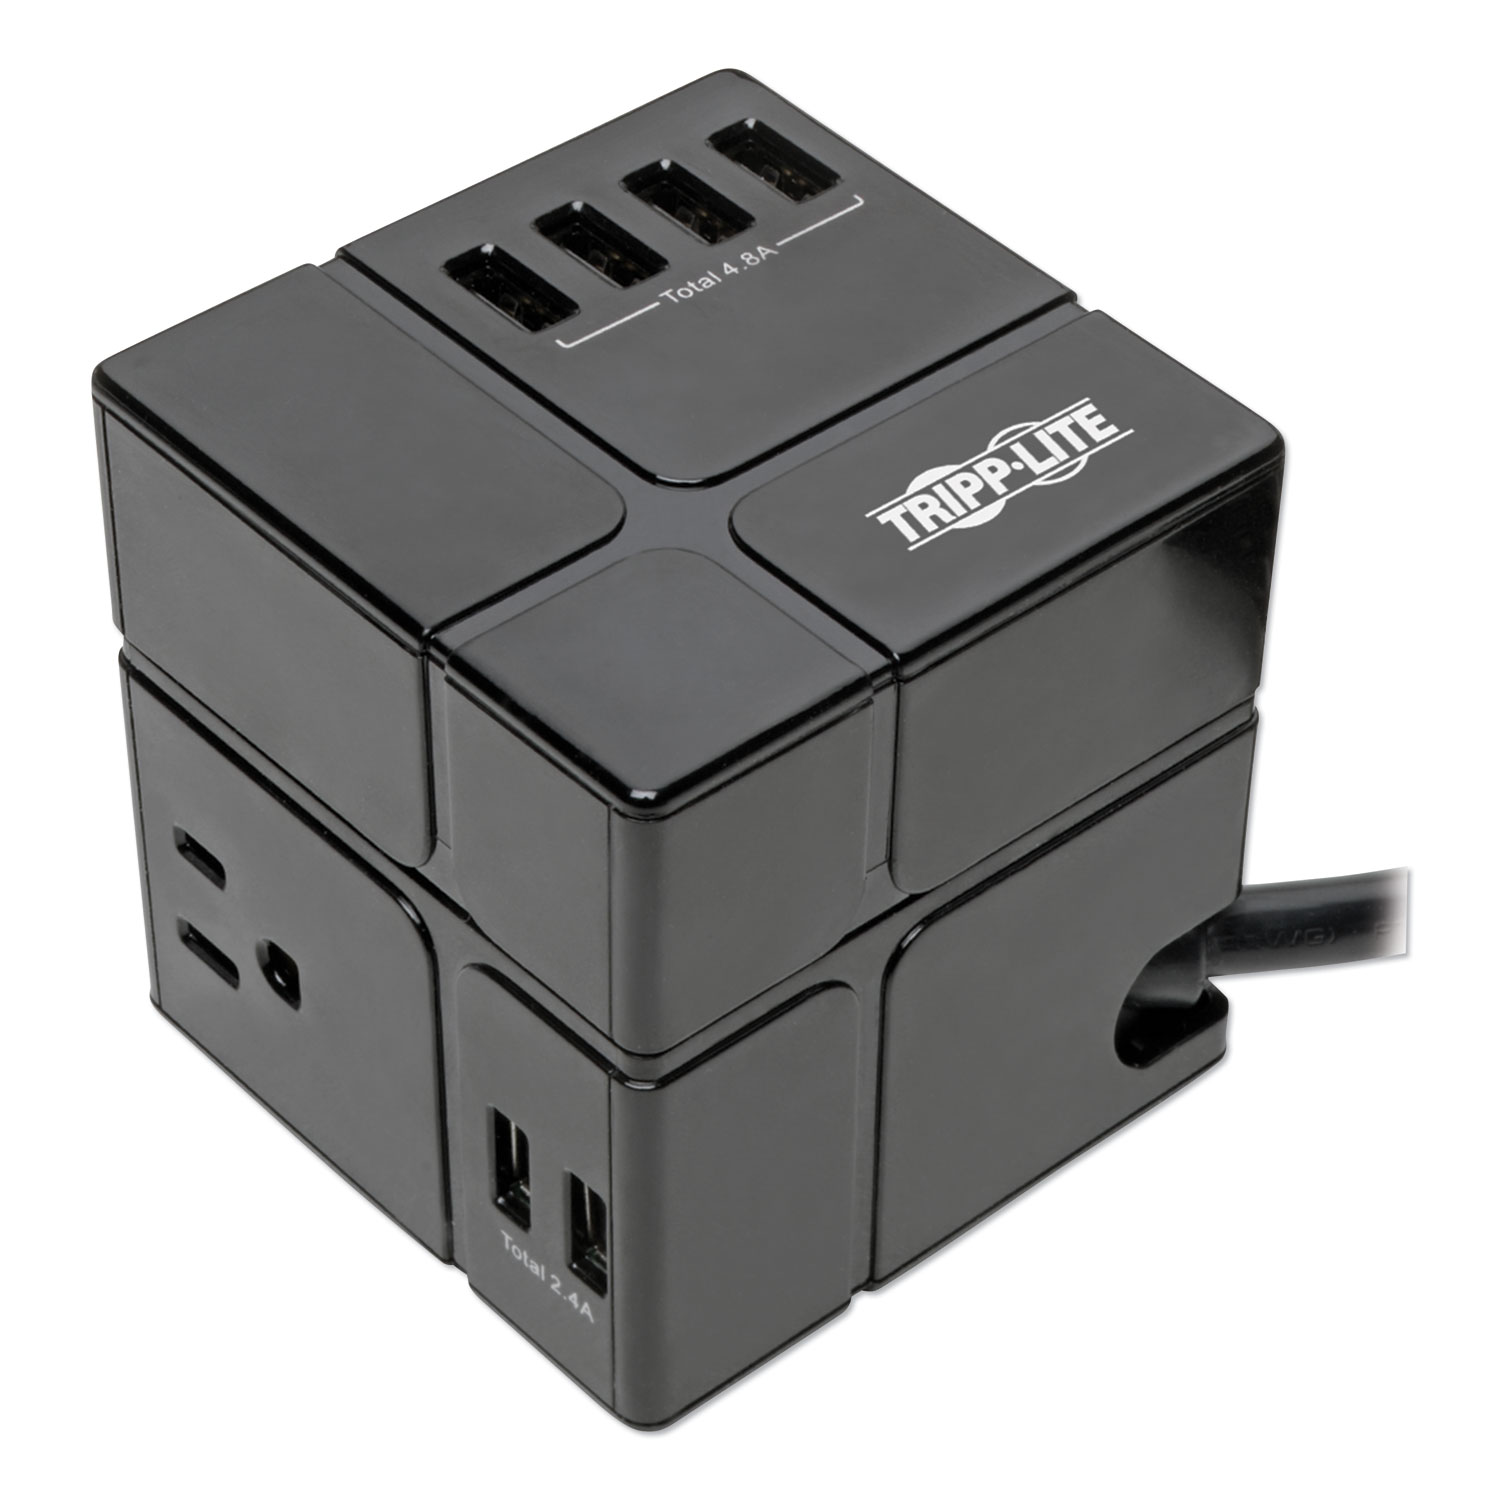  Tripp Lite TLP366CUBEUSBB Three-Outlet Power Cube Surge Protector with Six USB-A Ports, 6 ft Cord, 540 Joules, Black (TRPTLP366CUBEUS) 